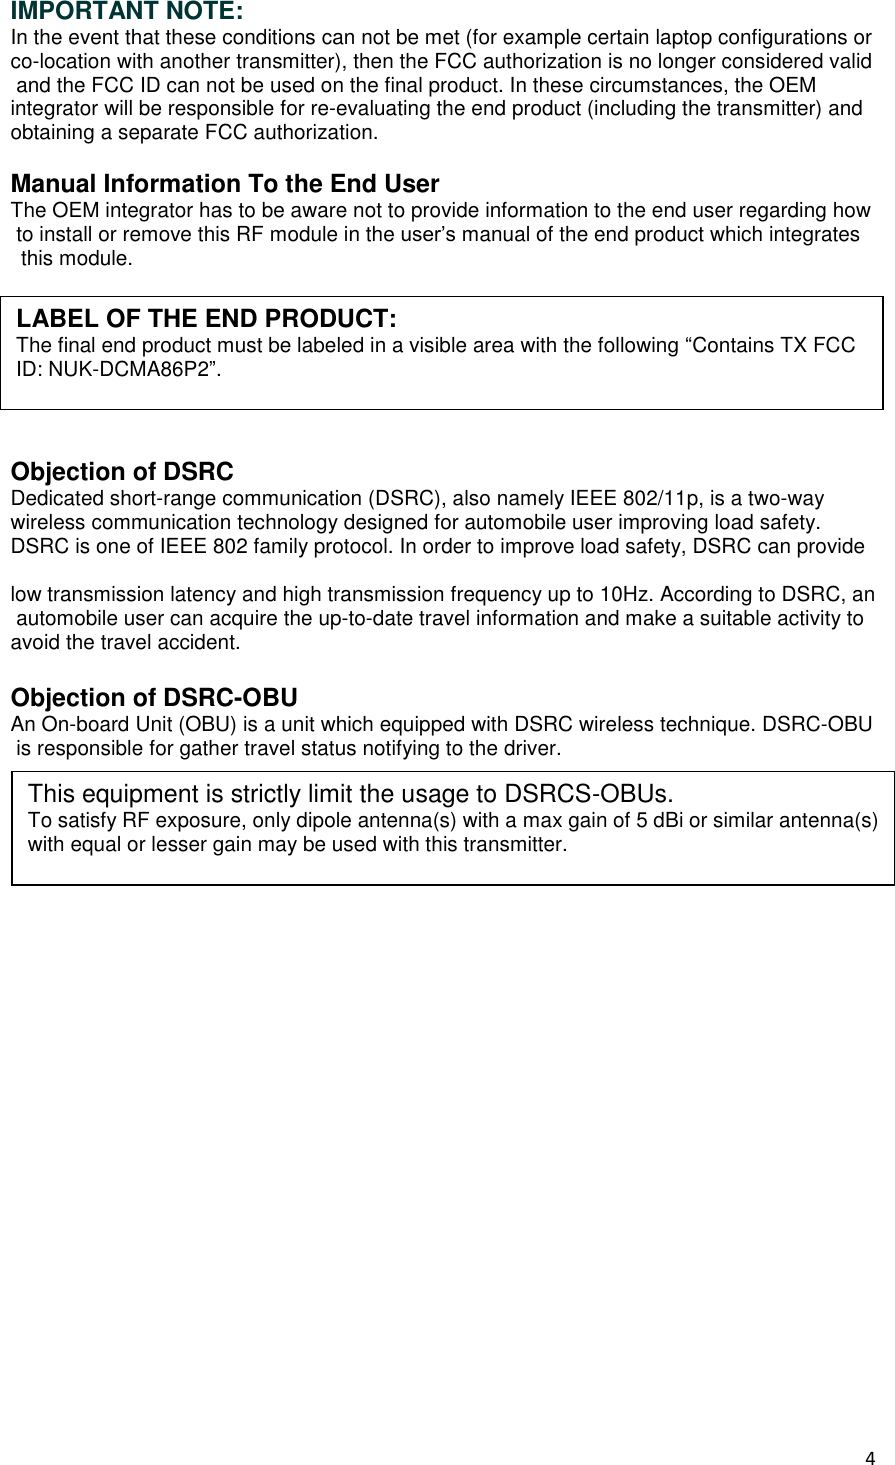 4  IMPORTANT NOTE: In the event that these conditions can not be met (for example certain laptop configurations or co-location with another transmitter), then the FCC authorization is no longer considered valid and the FCC ID can not be used on the final product. In these circumstances, the OEM      integrator will be responsible for re-evaluating the end product (including the transmitter) and obtaining a separate FCC authorization.   Manual Information To the End User The OEM integrator has to be aware not to provide information to the end user regarding how to install or remove this RF module in the user’s manual of the end product which integrates   this module.       Objection of DSRC Dedicated short-range communication (DSRC), also namely IEEE 802/11p, is a two-way    wireless communication technology designed for automobile user improving load safety.     DSRC is one of IEEE 802 family protocol. In order to improve load safety, DSRC can provide  low transmission latency and high transmission frequency up to 10Hz. According to DSRC, an automobile user can acquire the up-to-date travel information and make a suitable activity to avoid the travel accident.   Objection of DSRC-OBU An On-board Unit (OBU) is a unit which equipped with DSRC wireless technique. DSRC-OBU is responsible for gather travel status notifying to the driver.    This equipment is strictly limit the usage to DSRCS-OBUs. To satisfy RF exposure, only dipole antenna(s) with a max gain of 5 dBi or similar antenna(s) with equal or lesser gain may be used with this transmitter. LABEL OF THE END PRODUCT: The final end product must be labeled in a visible area with the following “Contains TX FCC ID: NUK-DCMA86P2”. 